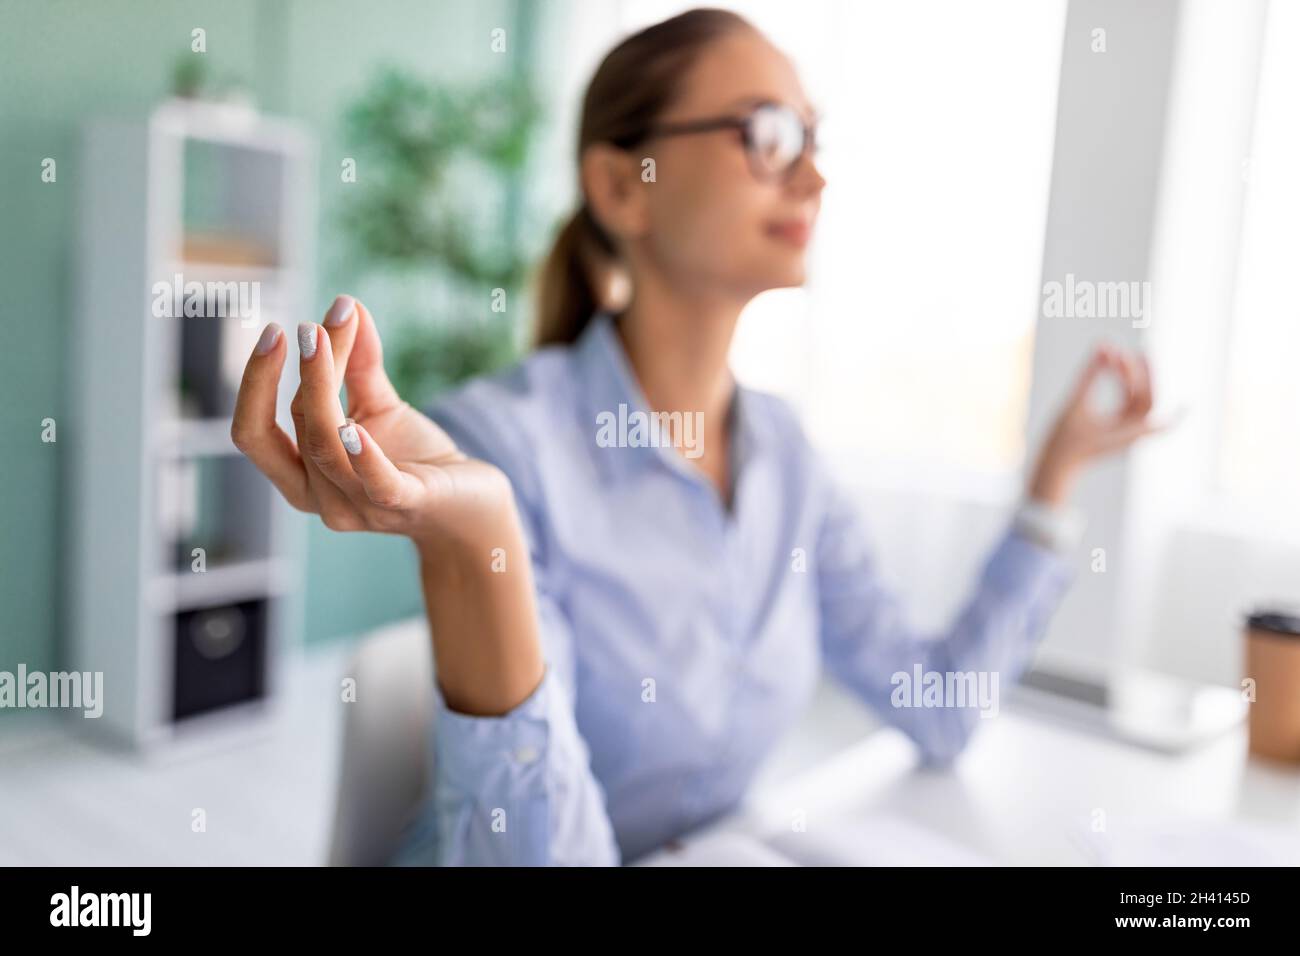 Office meditation. Calm female entrepreneur meditating and relaxing during stressful day at workplace, focus on hand Stock Photo